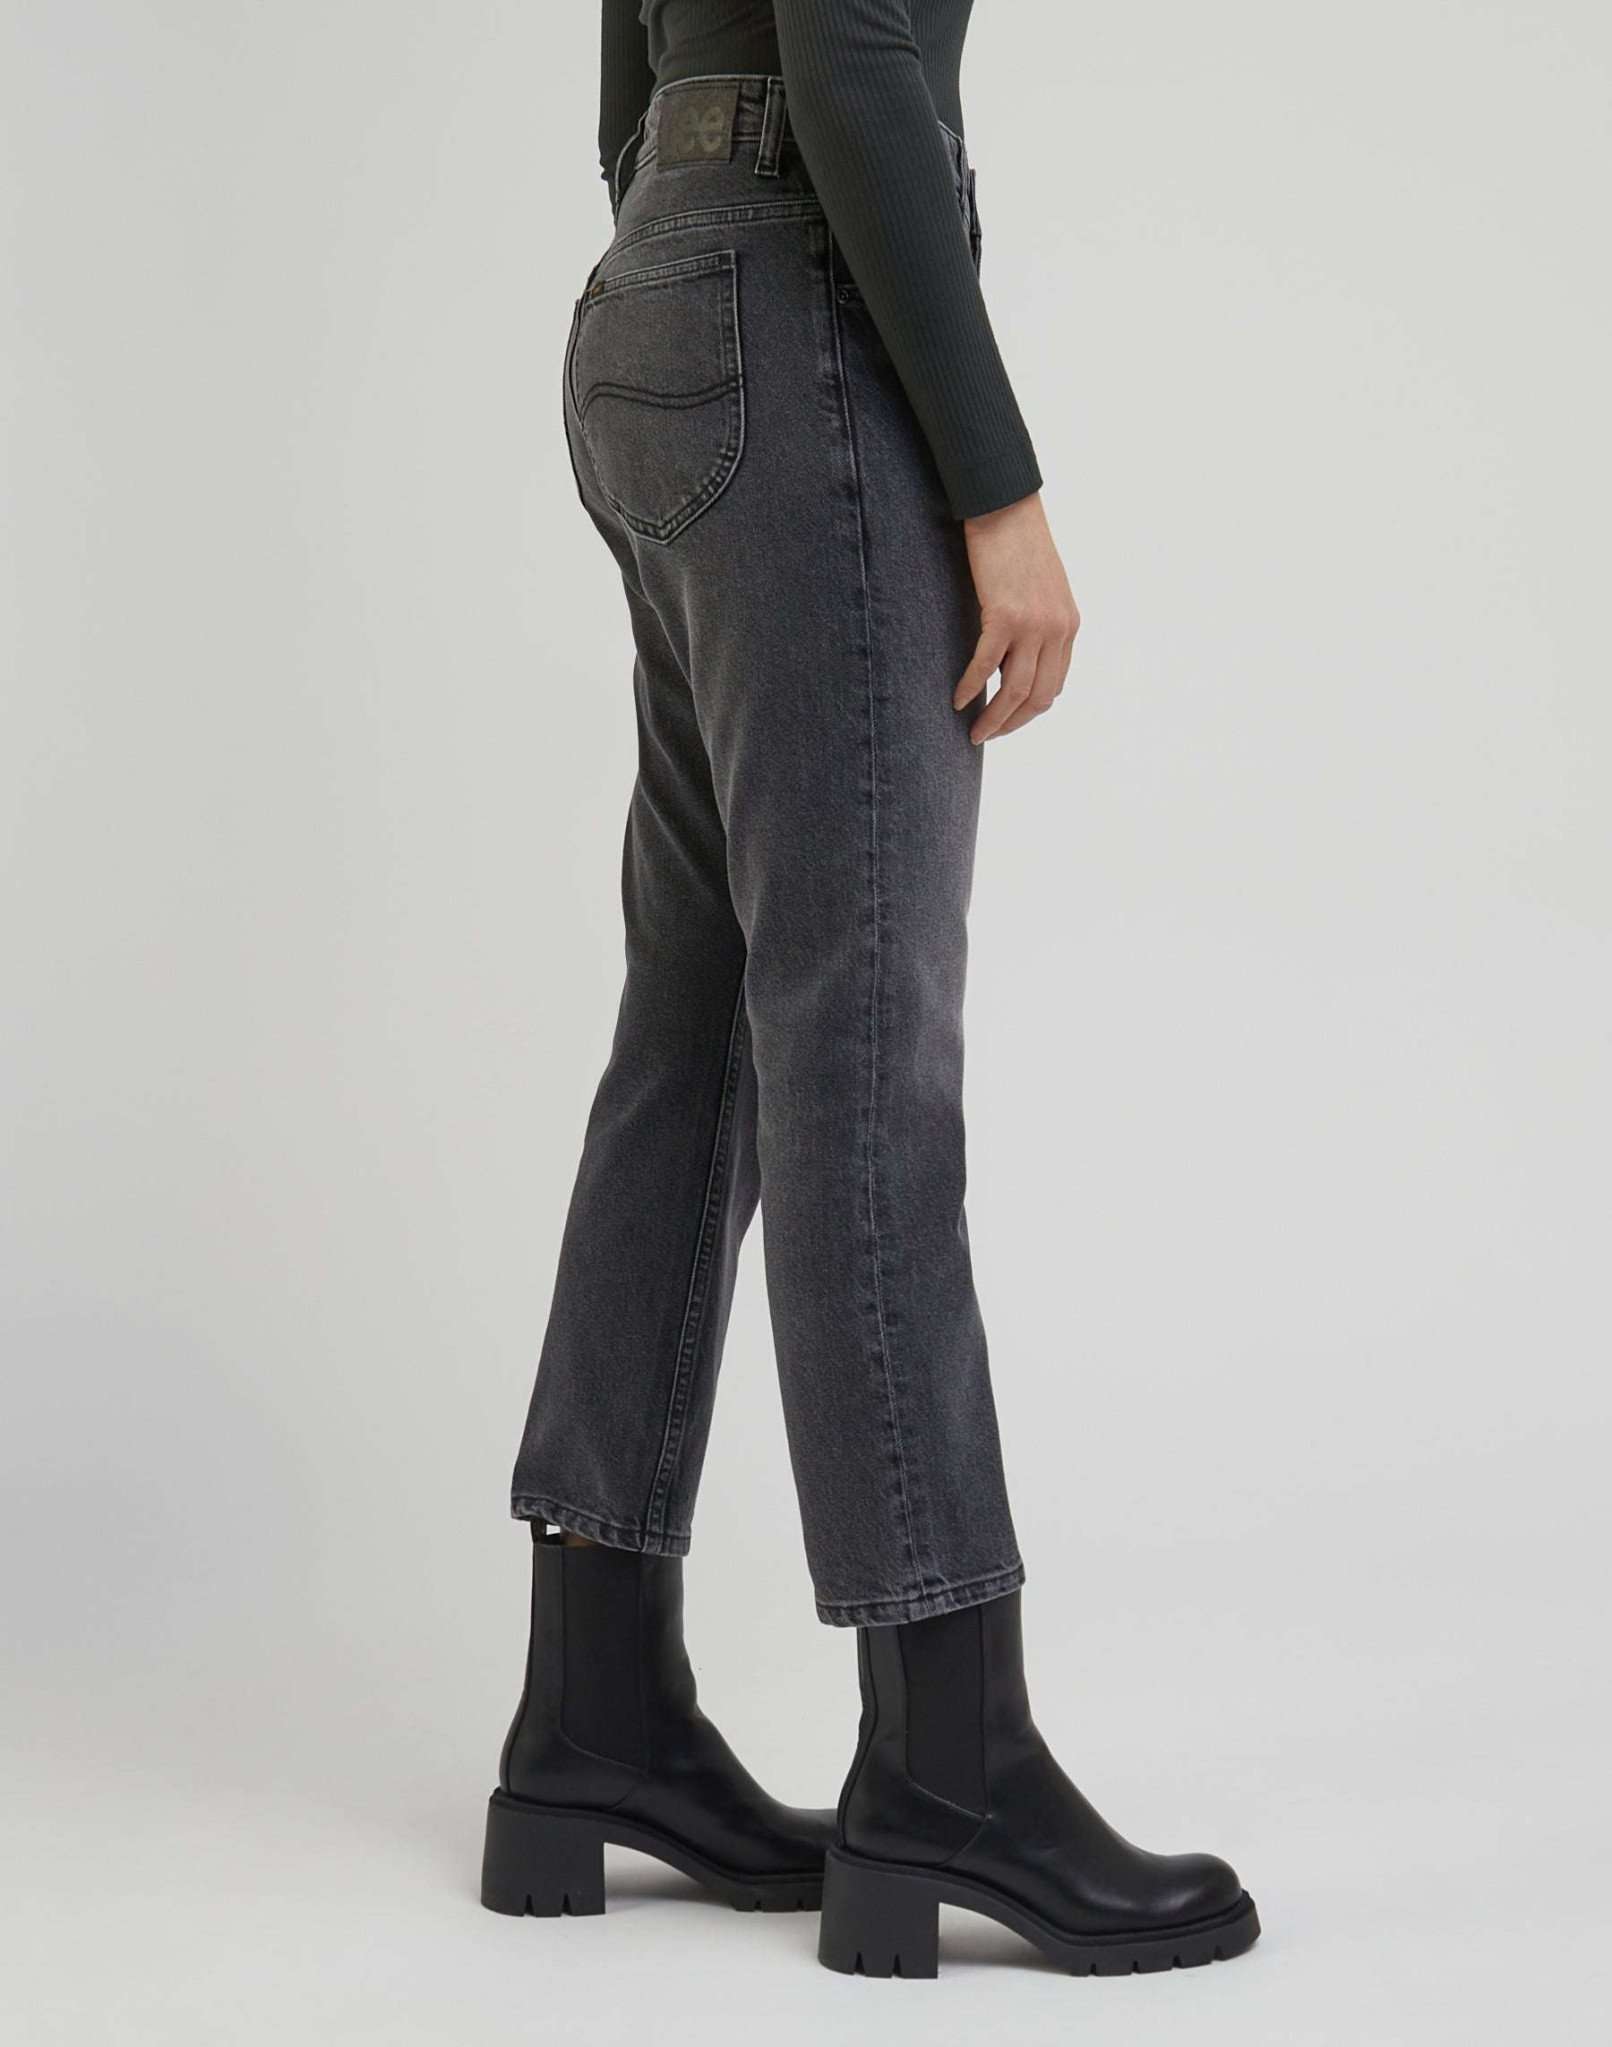 Rider Jeans in Refined Black Jeans Lee   